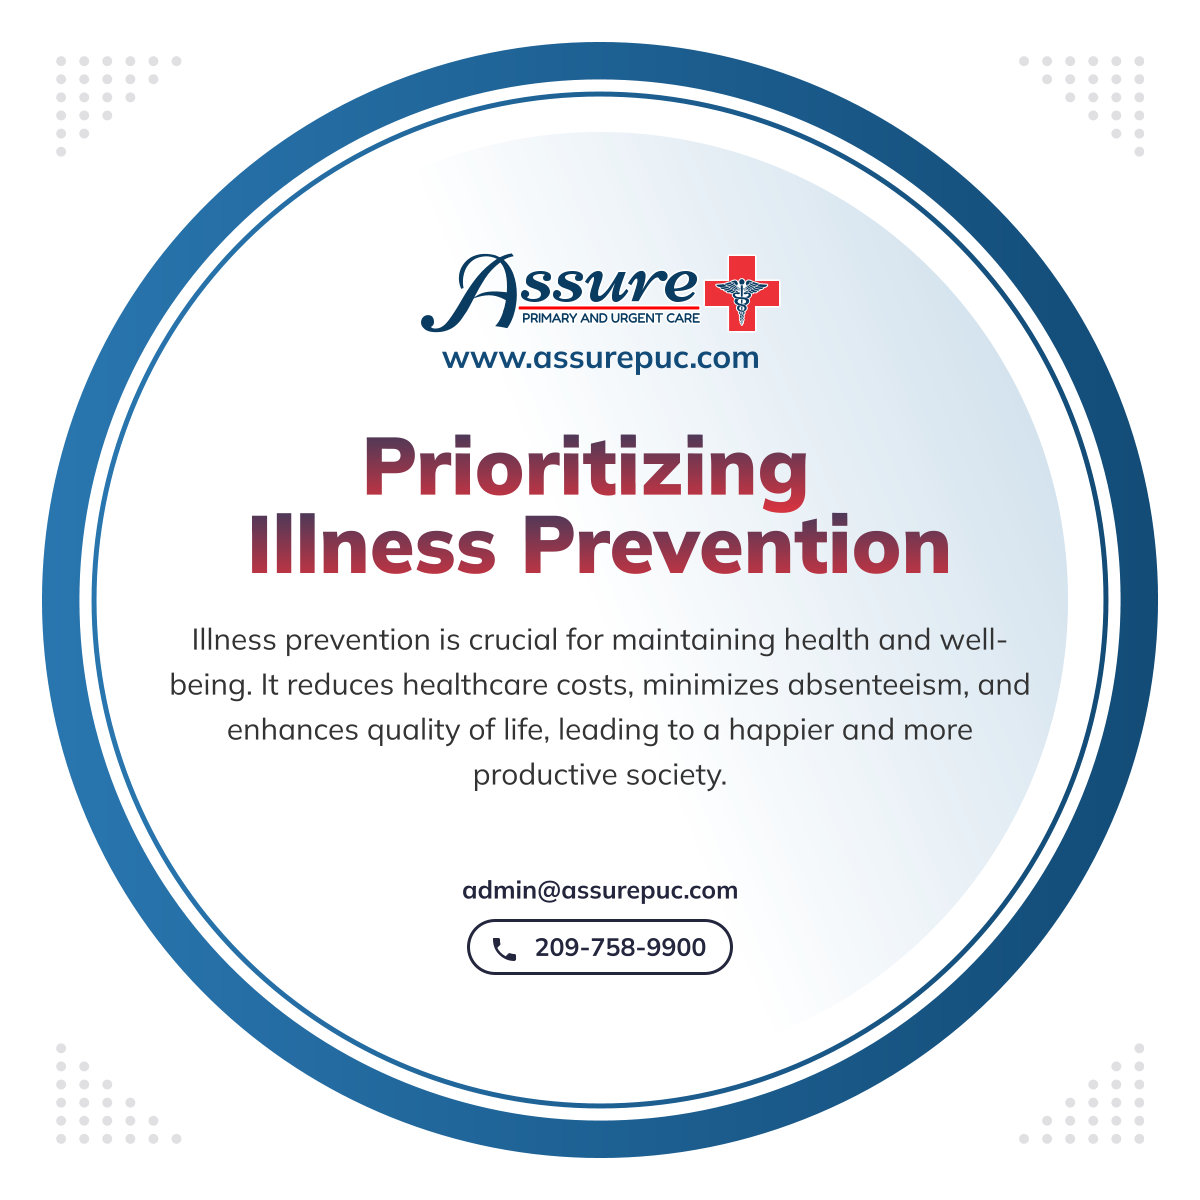 Prevention is always better than cure. By prioritizing illness prevention, we save resources and ensure a healthier and more vibrant community. 

#MountainHouseCA #MedicalServices #PreventionMatters